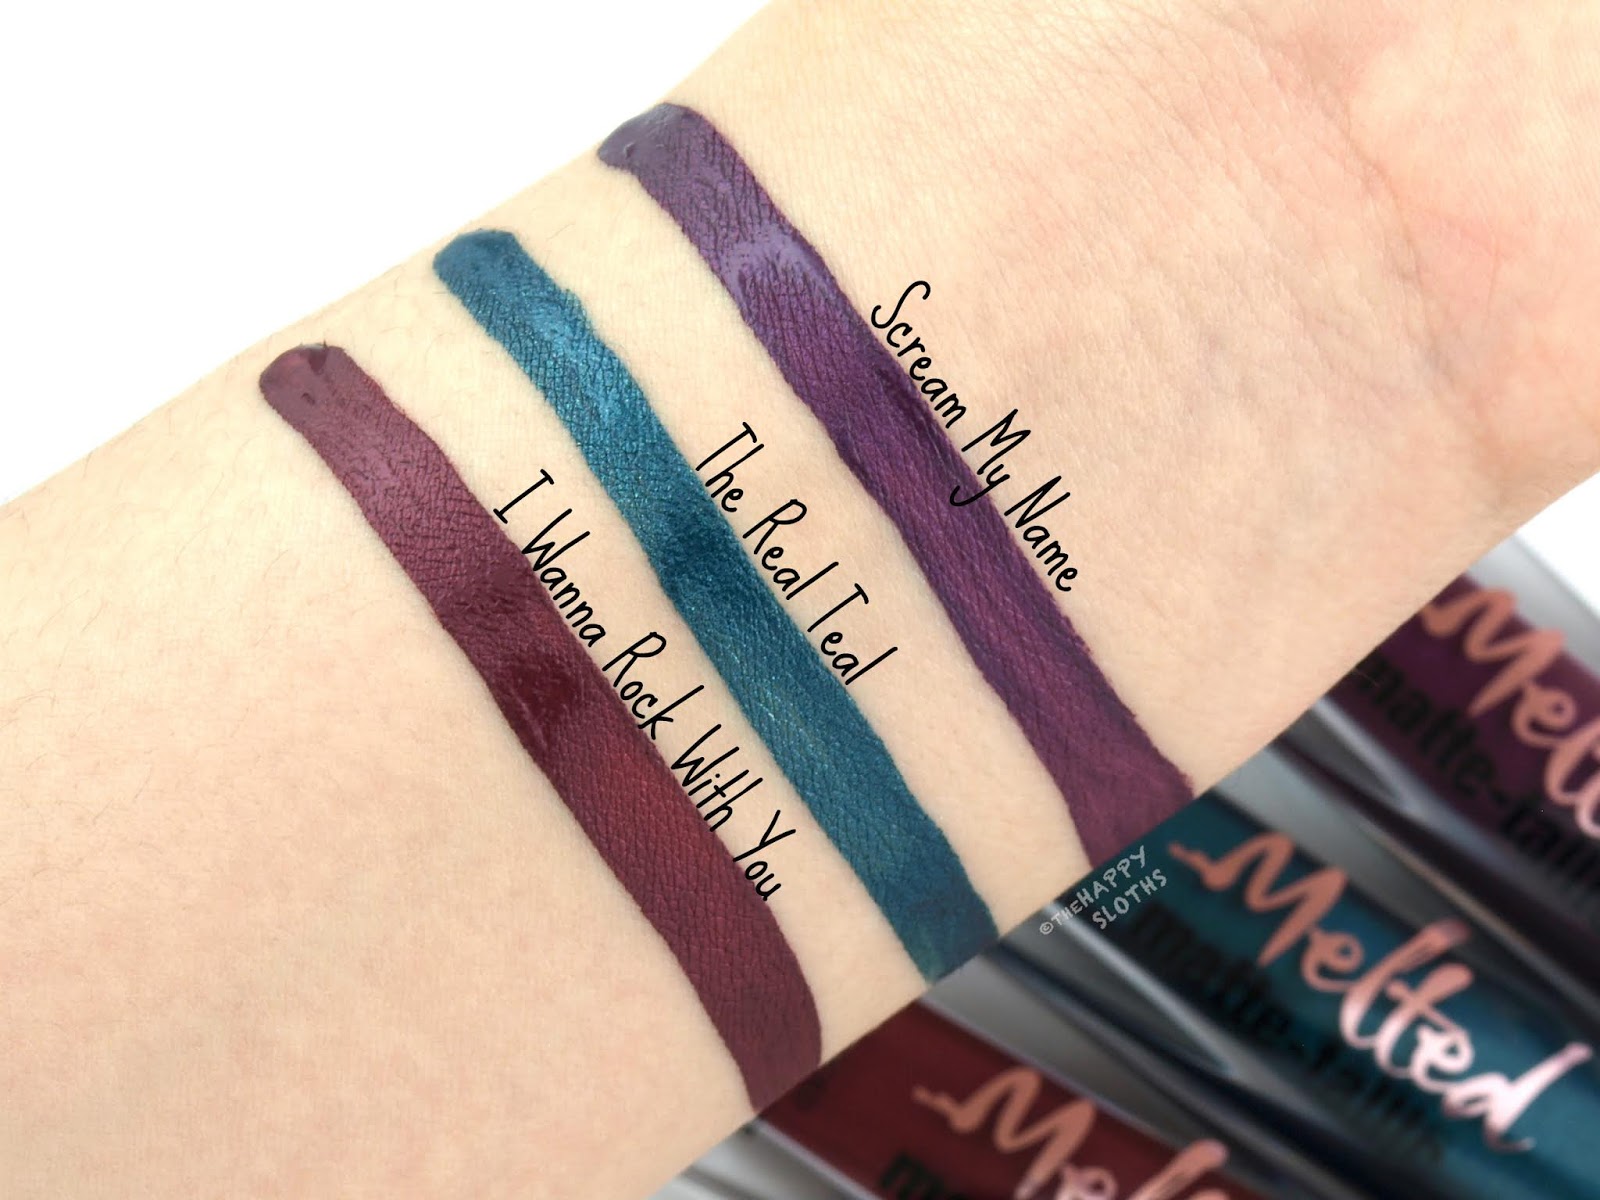 Too Faced | Melted Matte-tallic Liquified Metallic Matte Lipstick: Review and Swatches